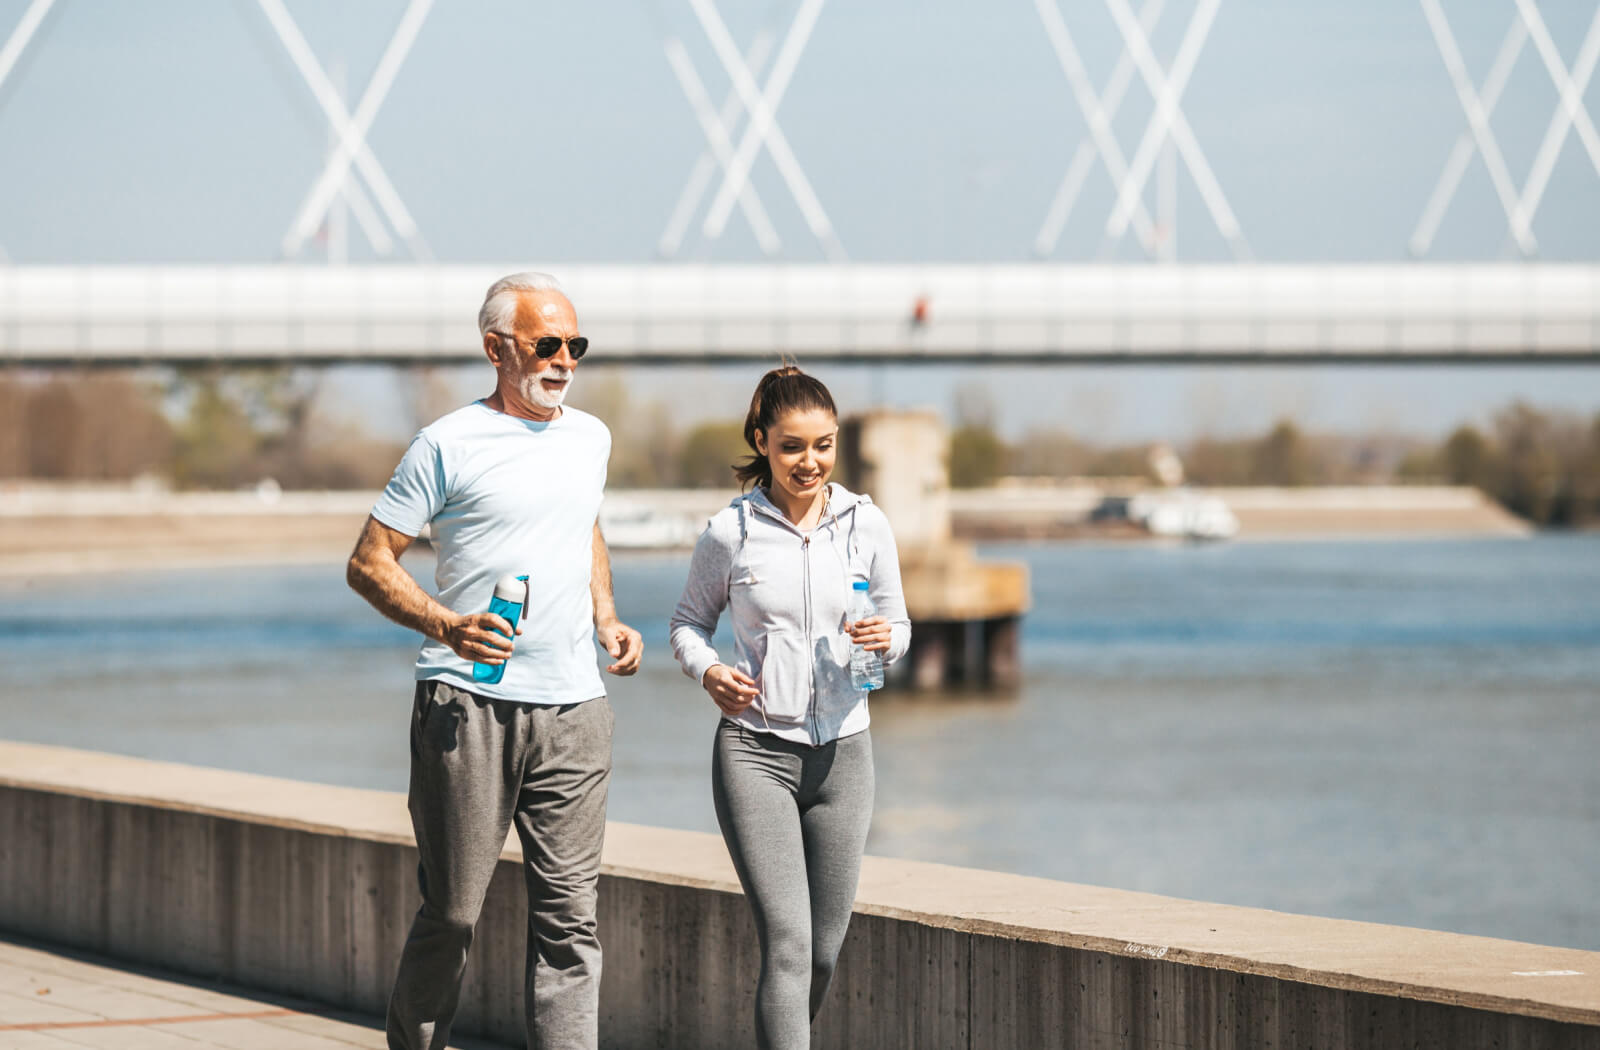 A young woman jogging by a body of water with her older adult father.